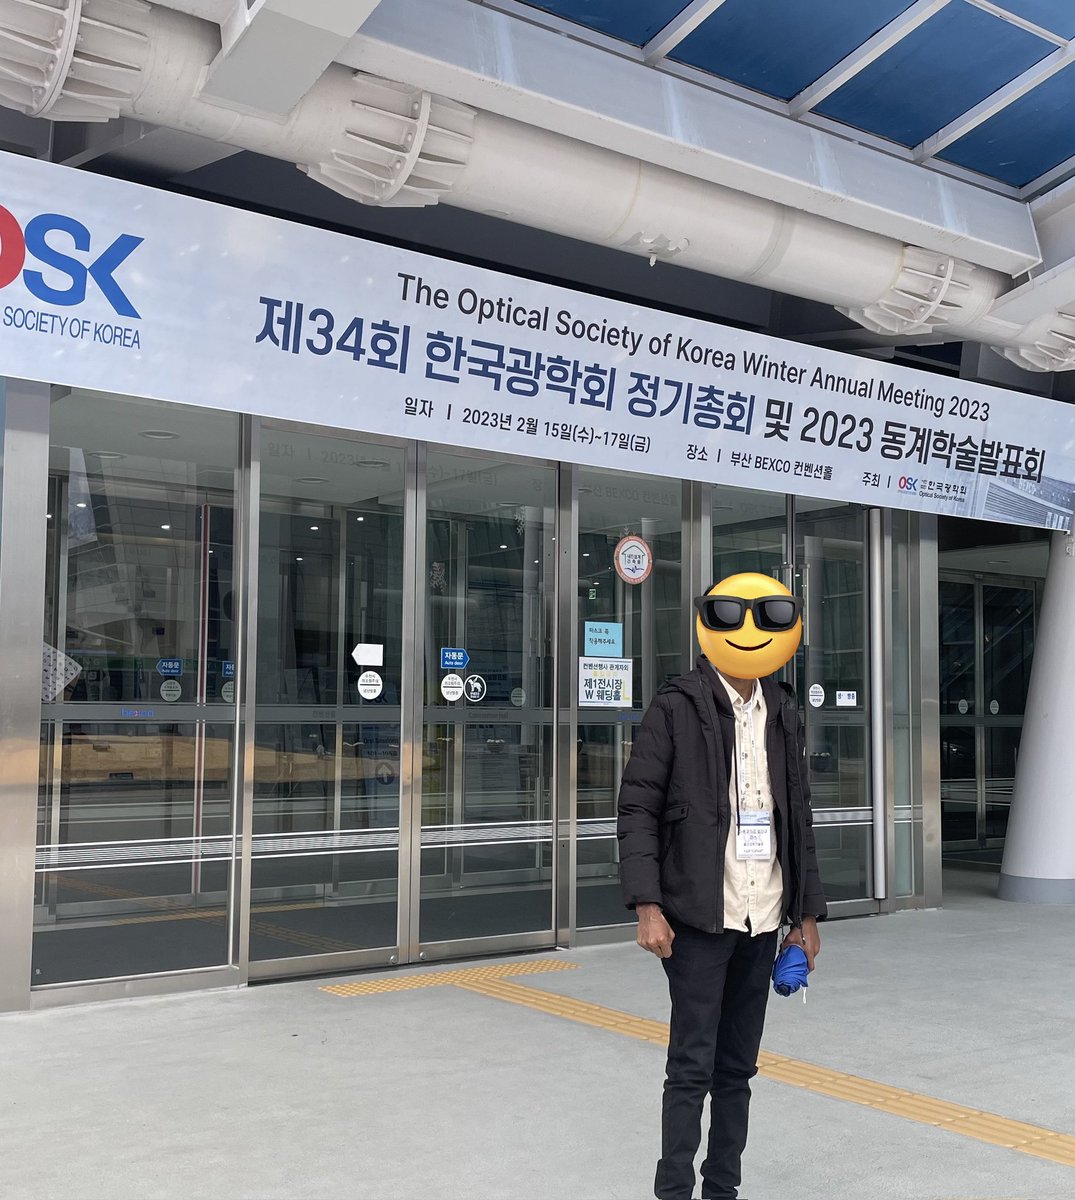 I,after attending consecutive lectures in OSK annual meeting. 

#busan #opticalsociety #SouthKorea #graduatestudent #phdlife